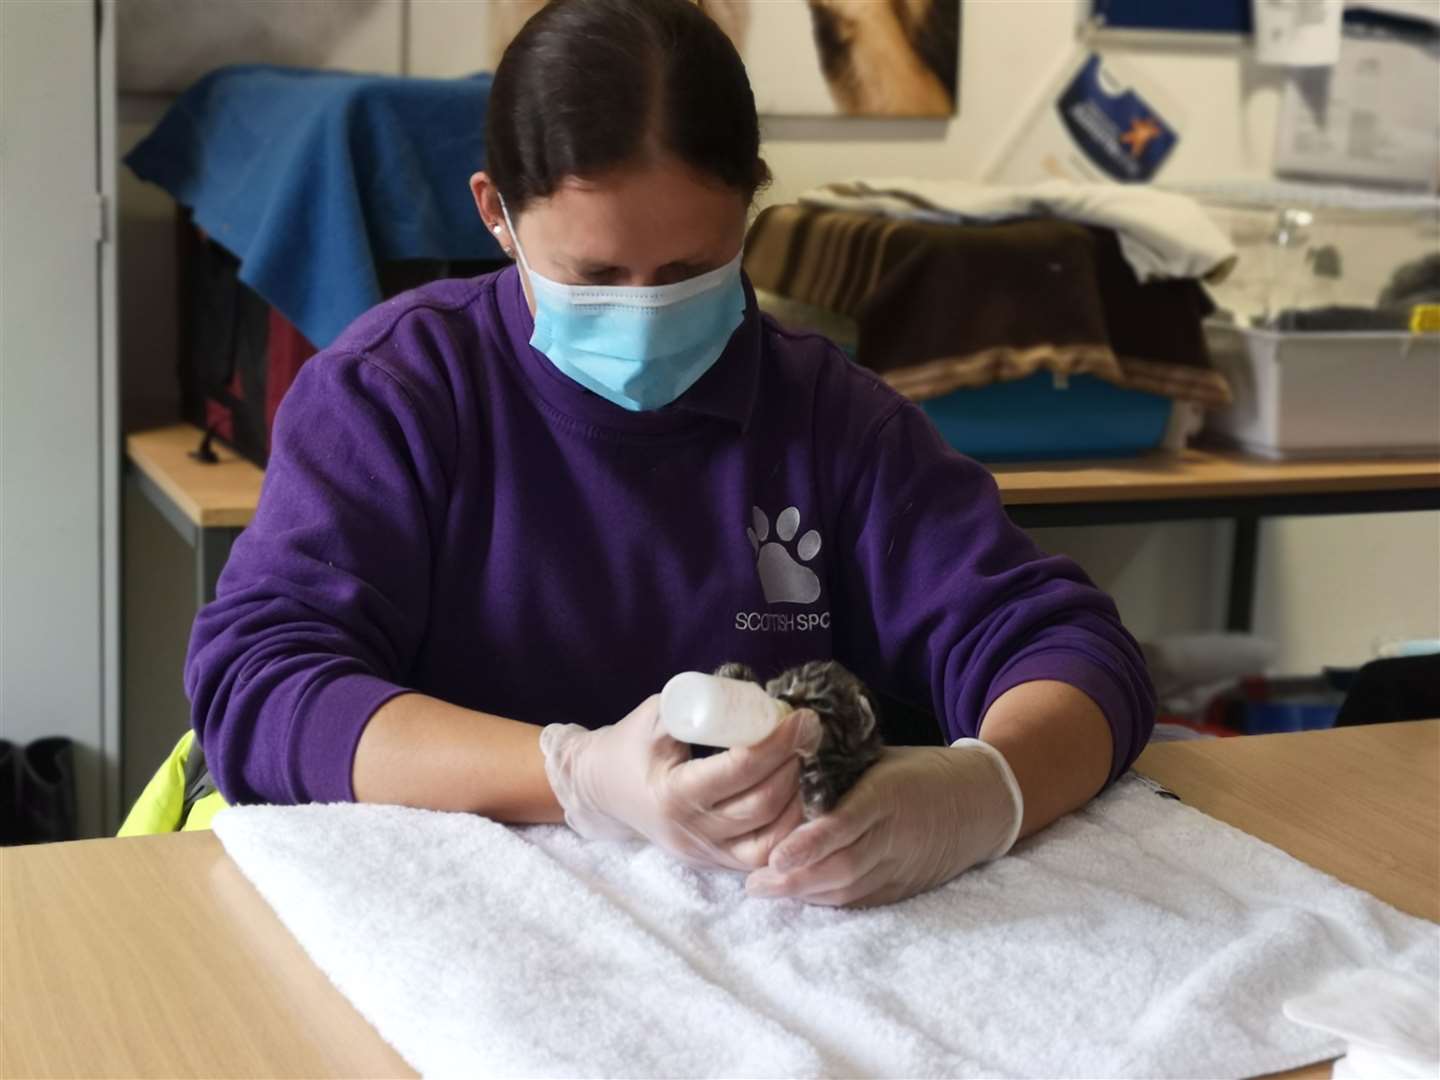 The Scottish SPCA in Aberdeenshire desperately need masks to allow them to continue their work safely. Picture courtesy of Scottish SPCA